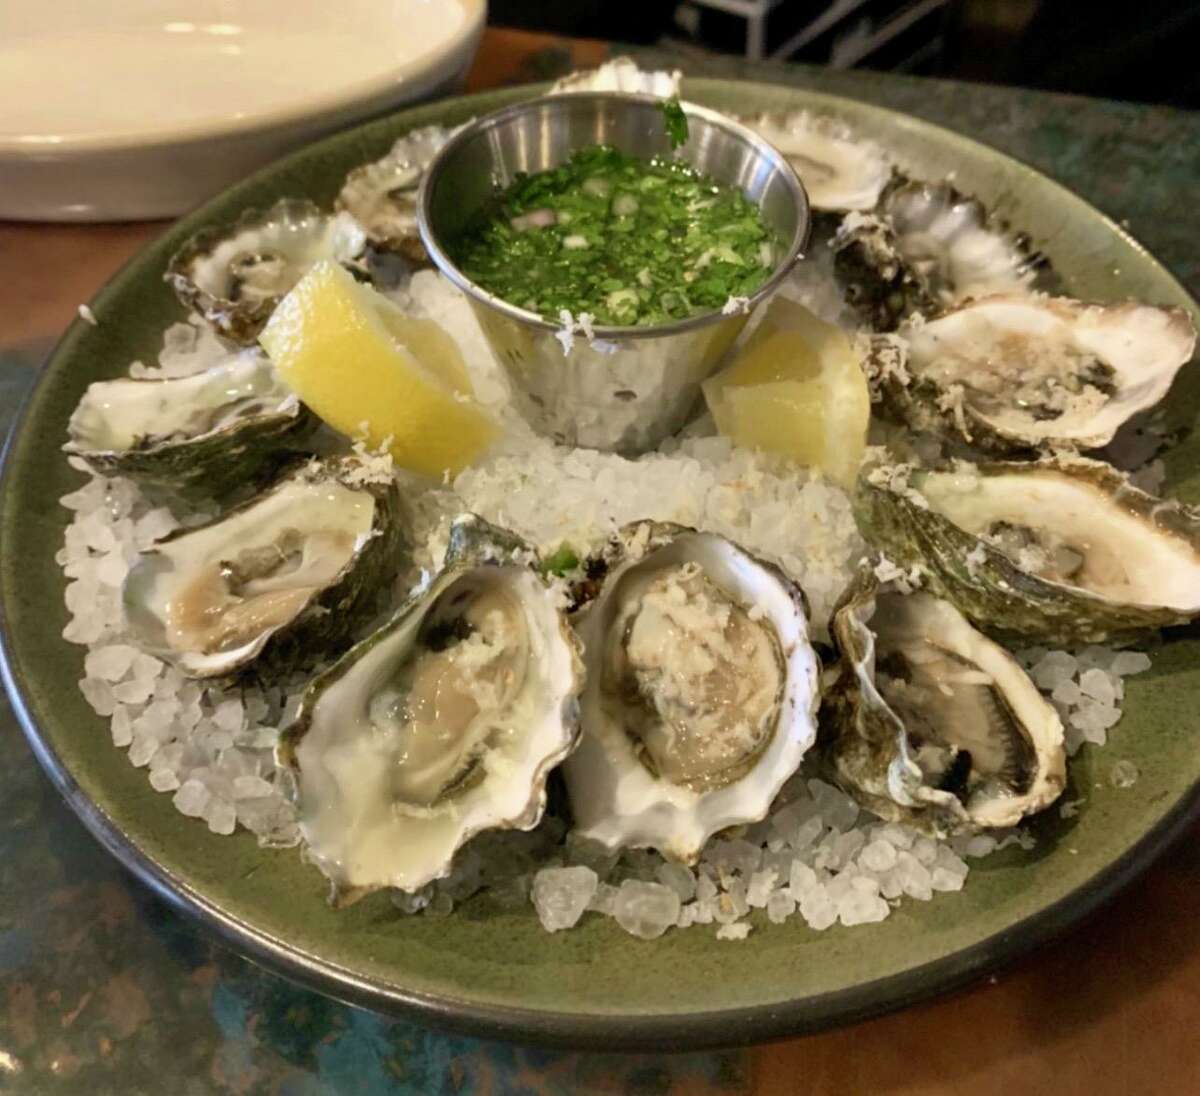 Oysters on the half shell from Branden Nichols' pop-up at Bar Cava in Martinez.